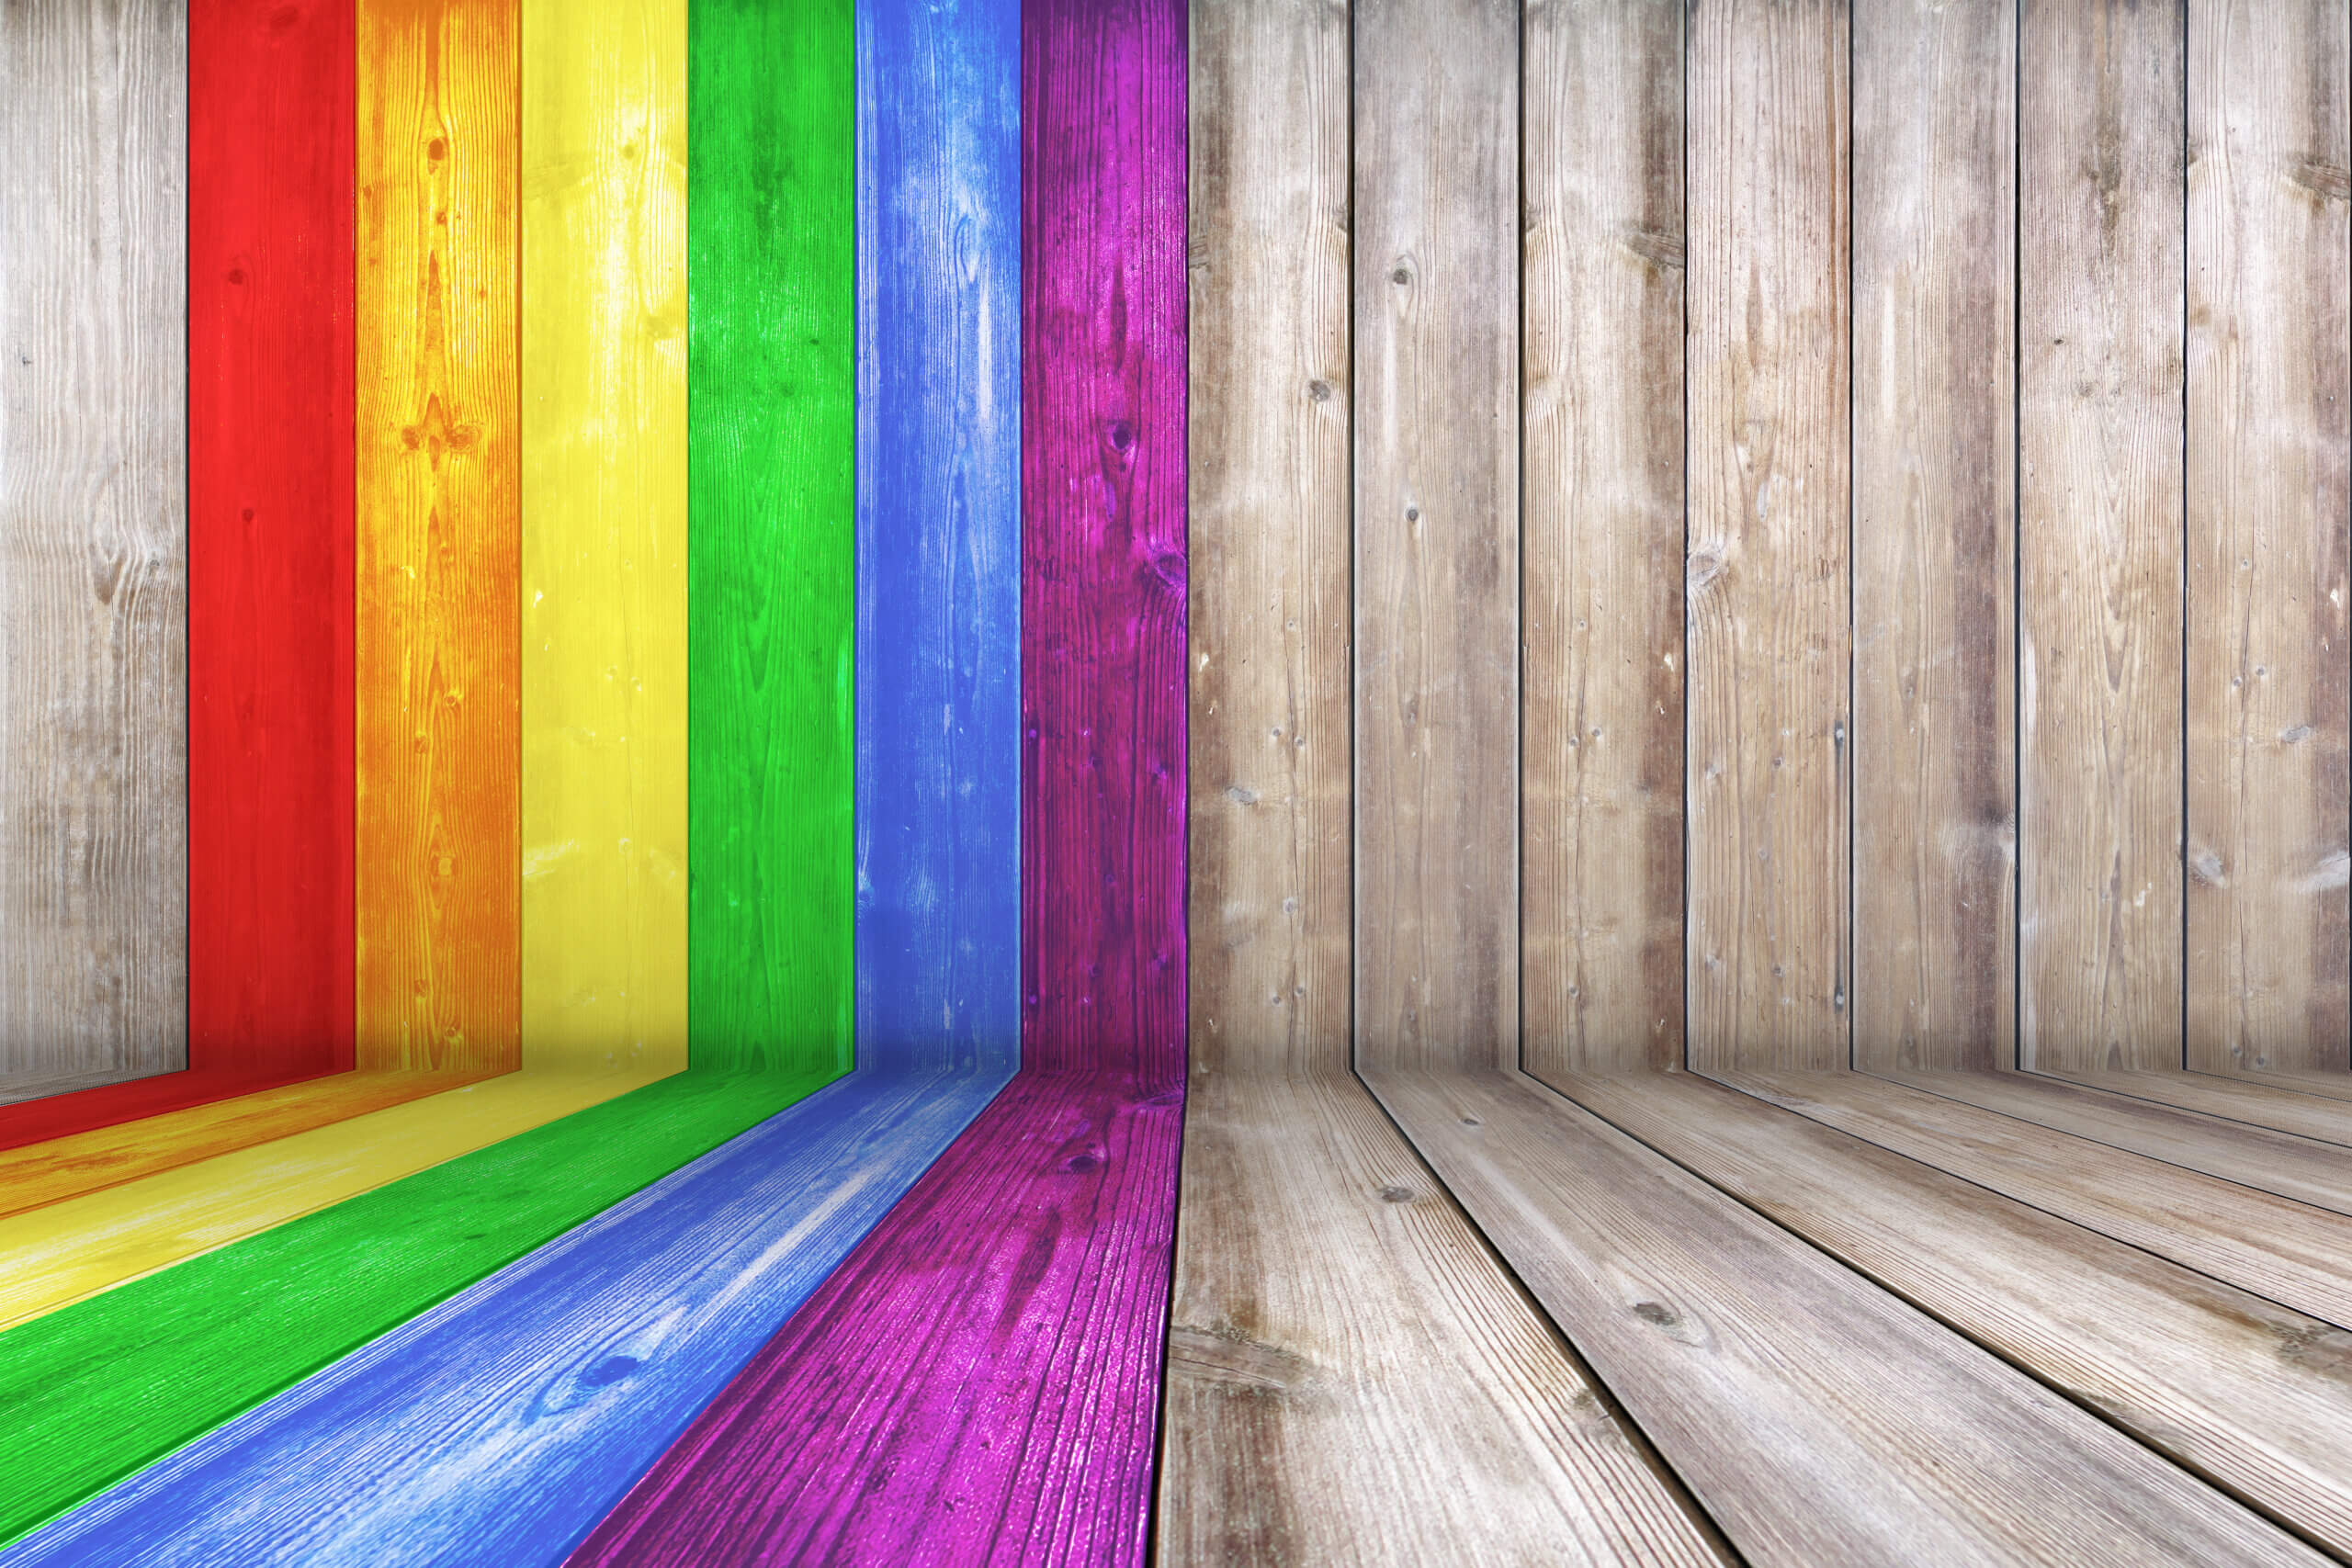 Reclaimed wood floor and wall painted in the colors of the LGBTQ PRIDE flag to welcome attendees of this Women's Coming Out Later in Life Support Group.